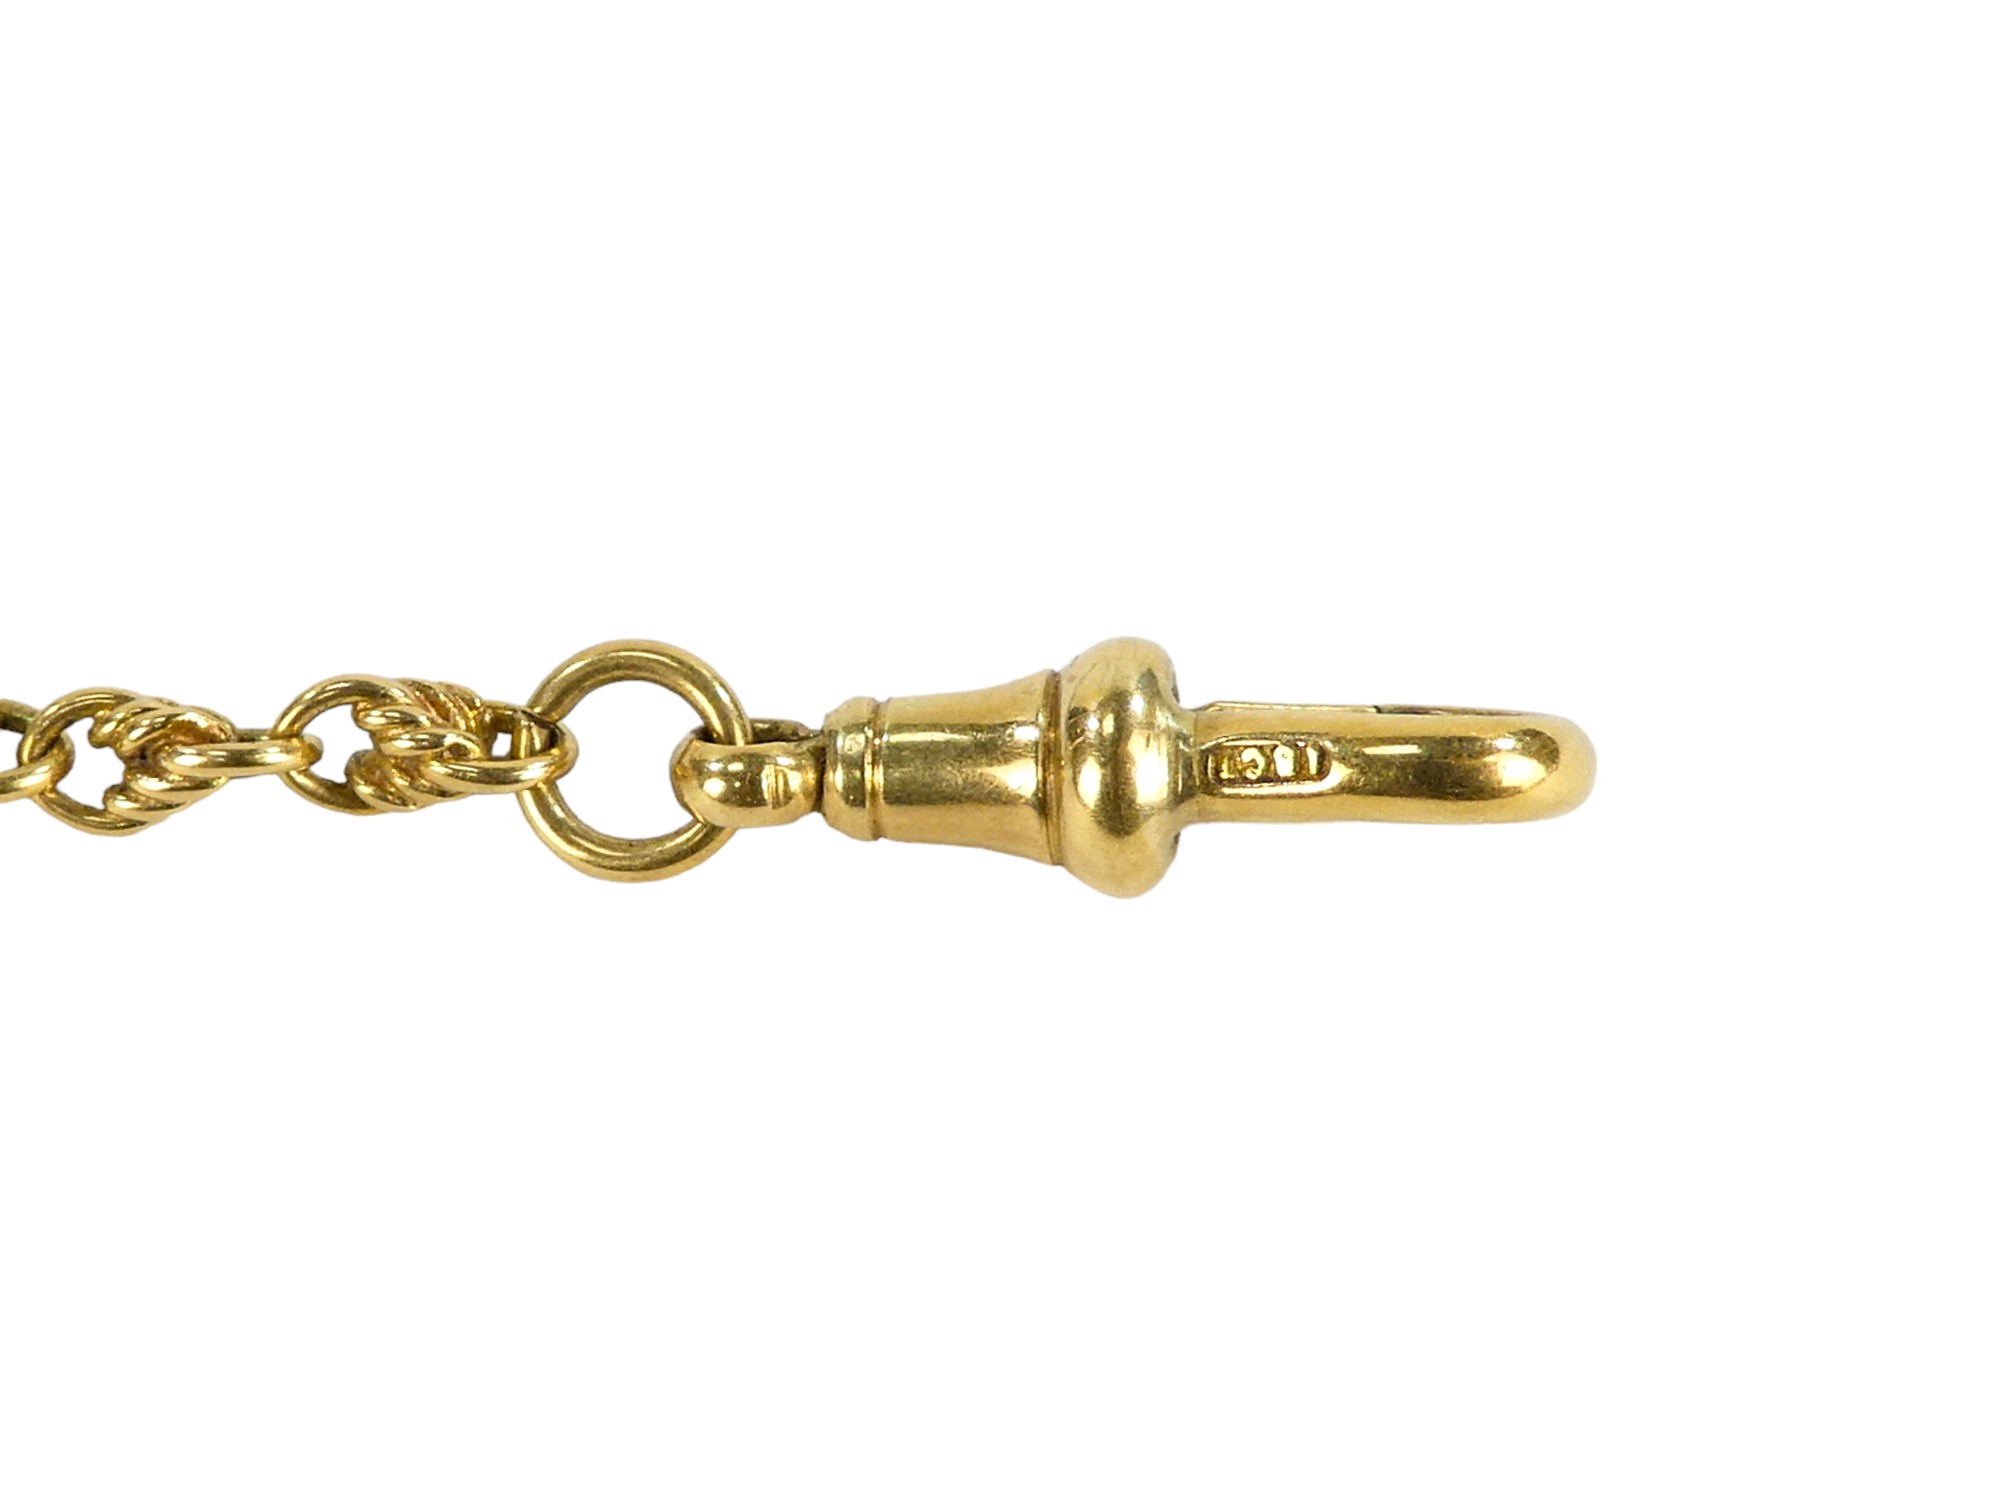 A 9ct gold swizzle stick - engine turned, on a gilt metal chain with 18ct gold clasps, weight 18g. - Image 2 of 5